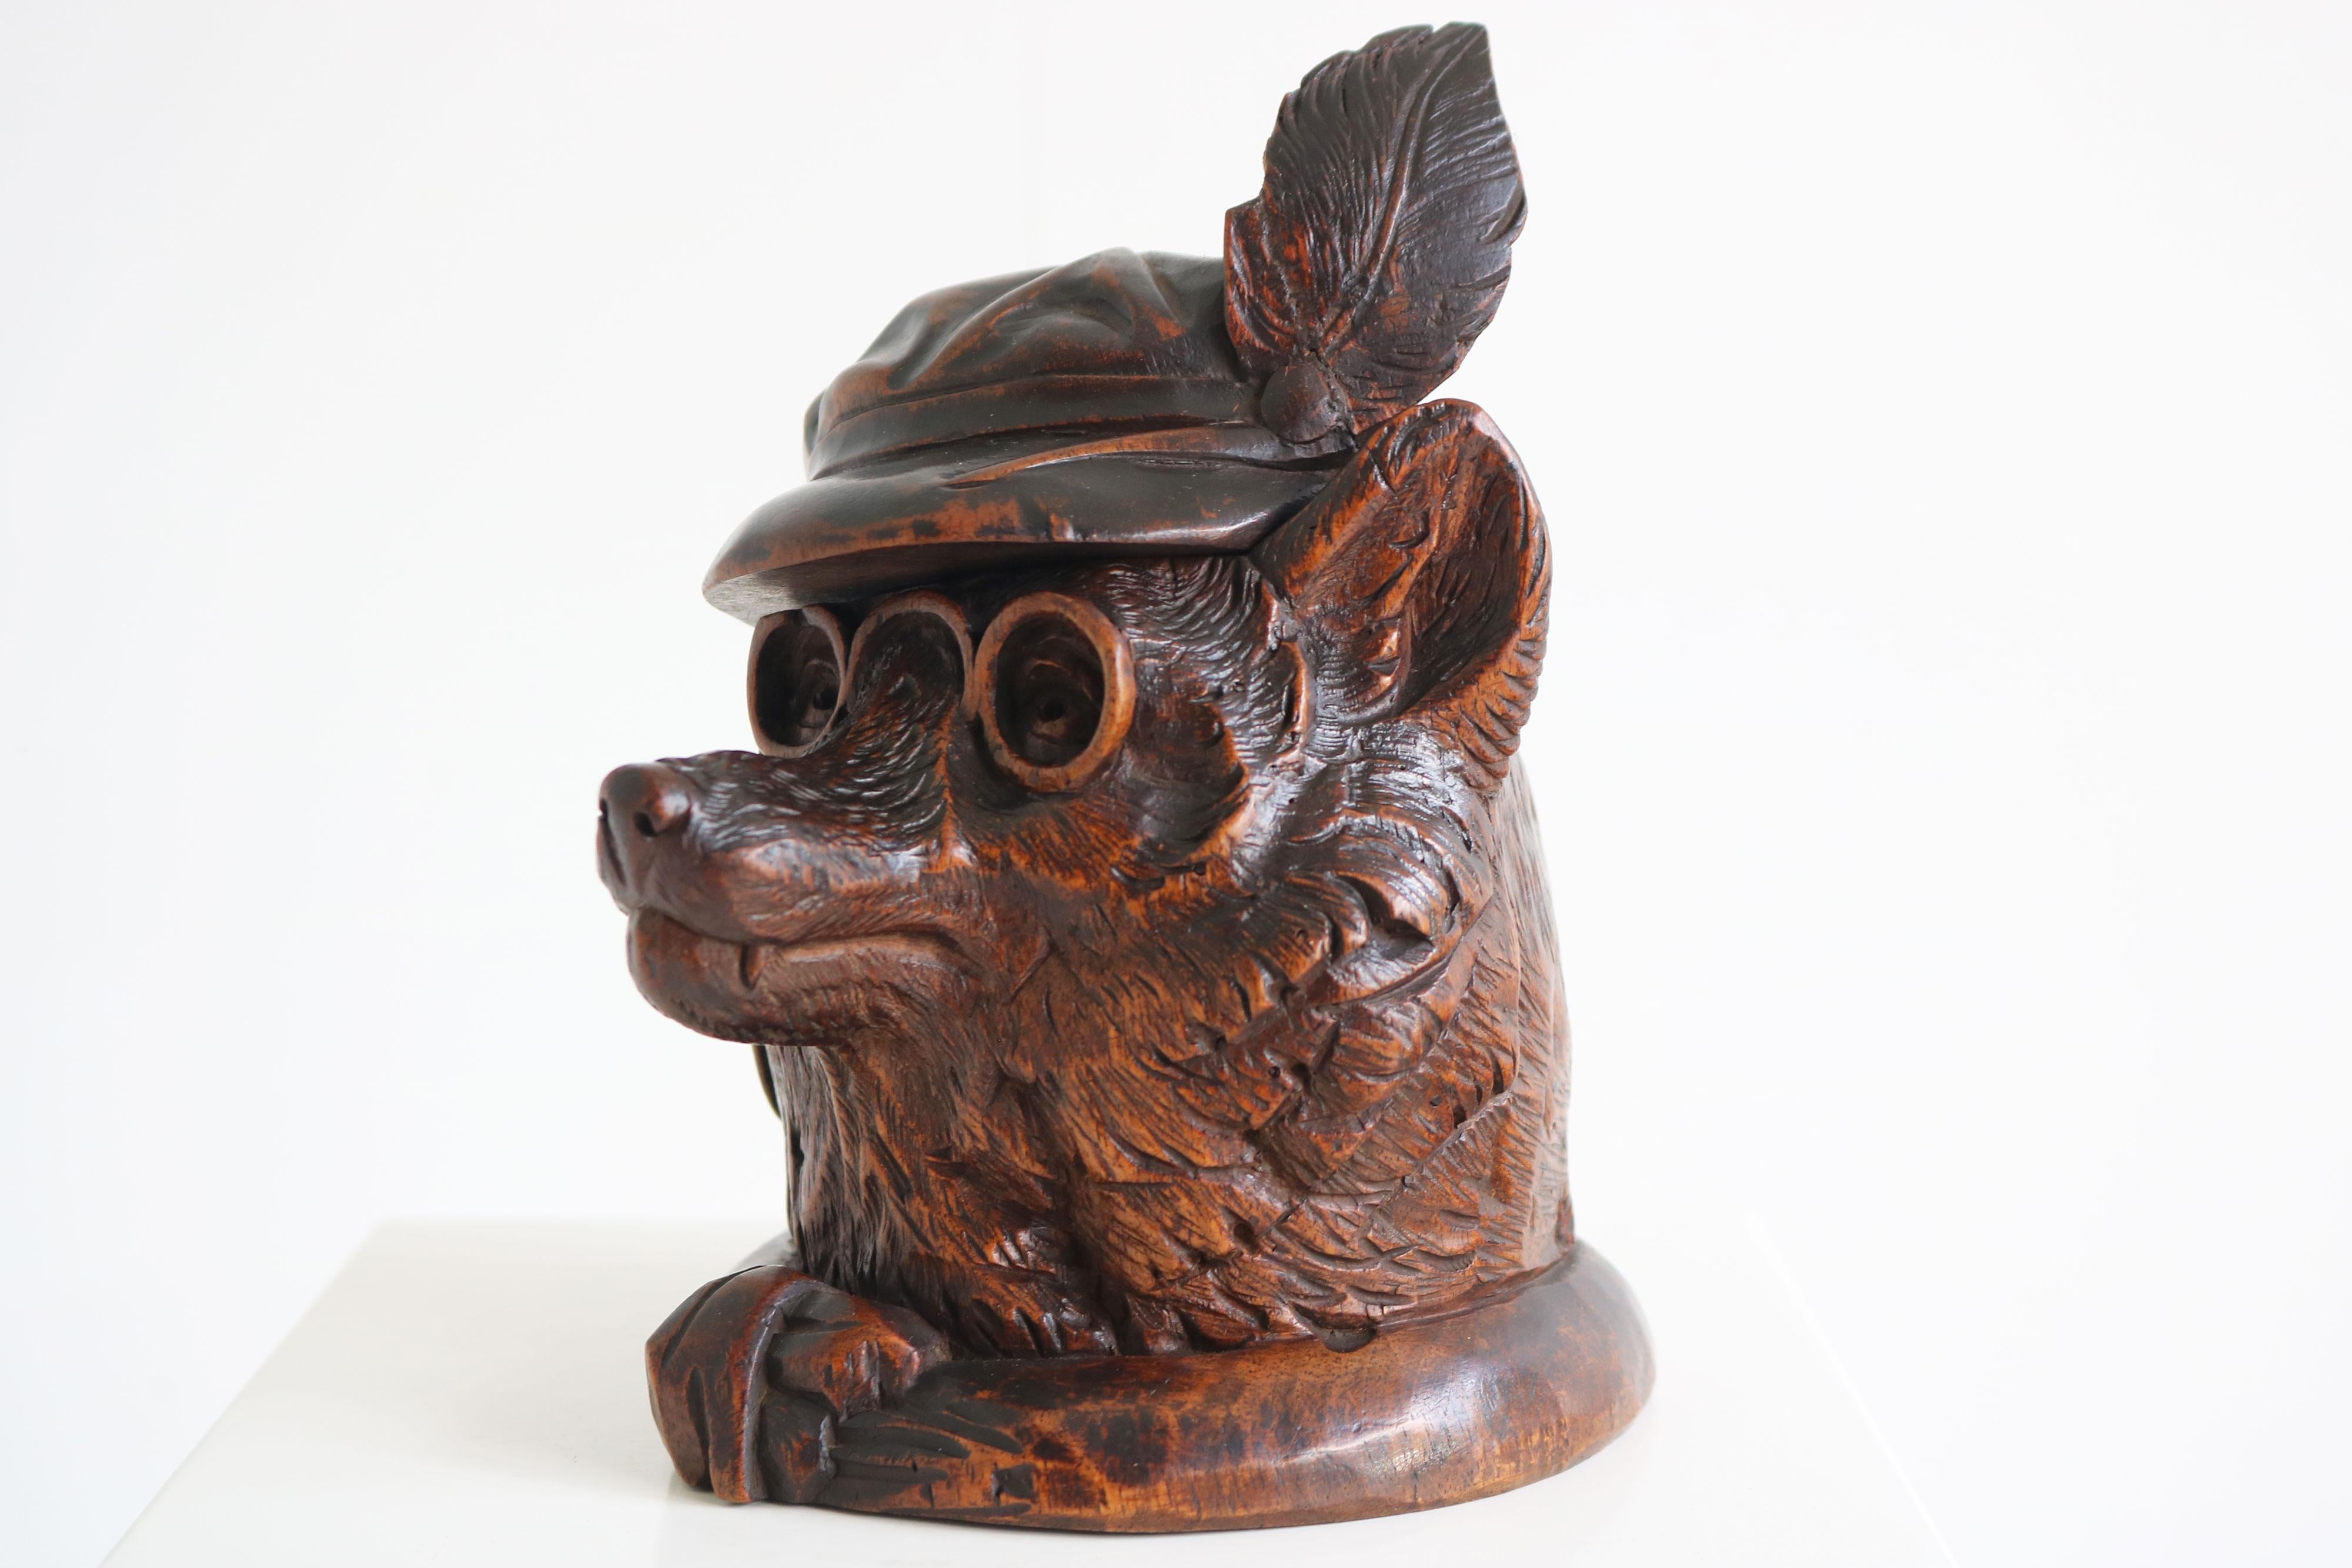 Gorgeous most rare Swiss Black Forest 19th century Inkwell / desk accessory fully hand carved displaying a dog wearing a hat and monocle 
Detailed carving by a master carver. Comes with original glass insert (rare these are often lost) 
Really nice